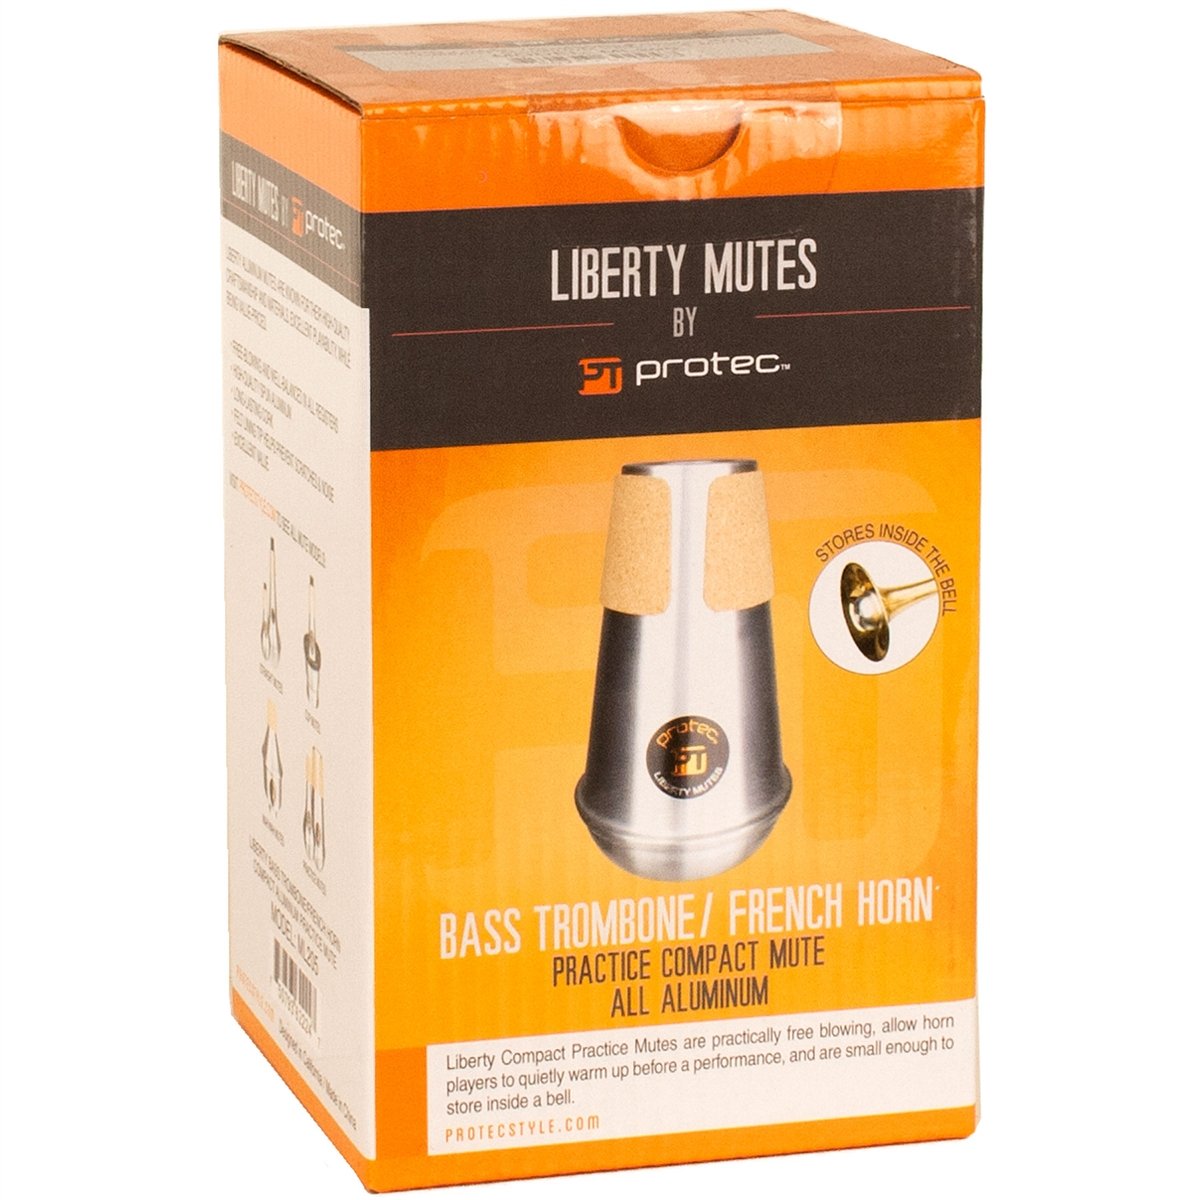 Protec - Liberty Aluminium Practice Mute for Bass Trombone/French Horn (Compact)-Mute-Protec-Music Elements